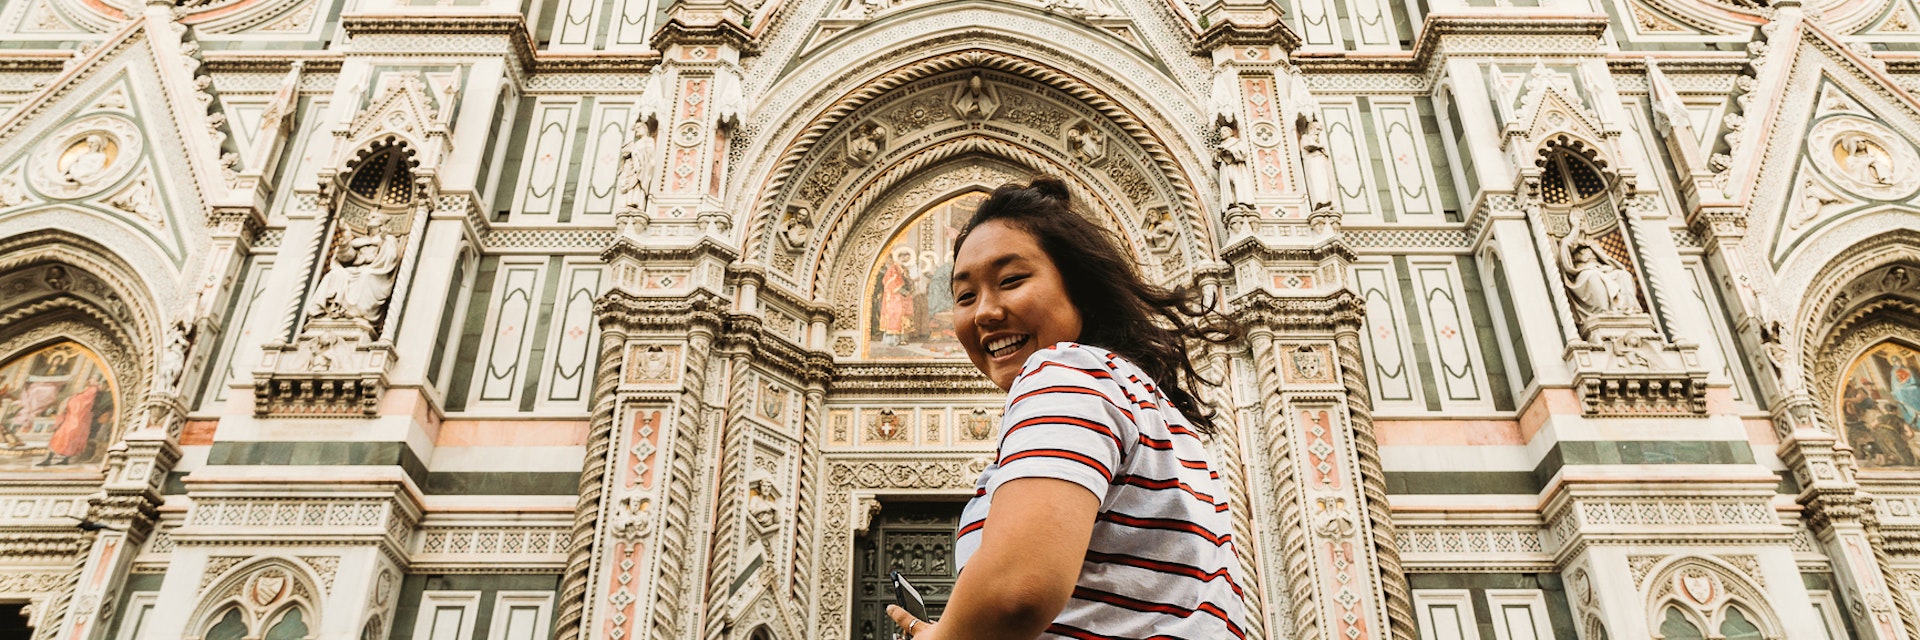 Asian tourist visiting Florence, Italy